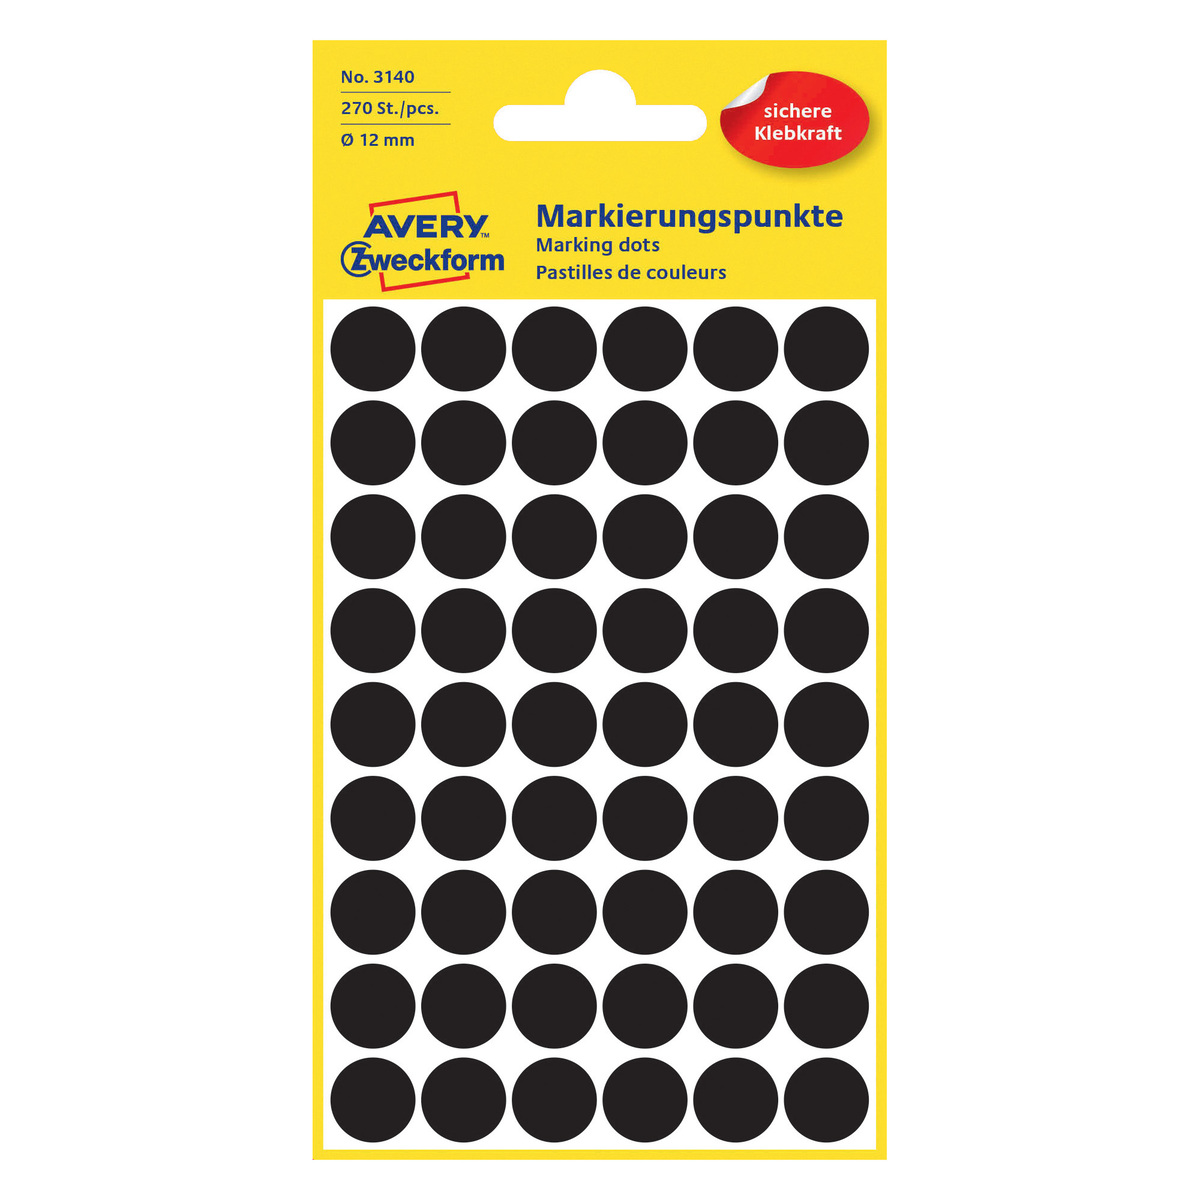 Avery 12 mm Permanent Dot Stickers, 270 Labels/5 Page, Black, 3140